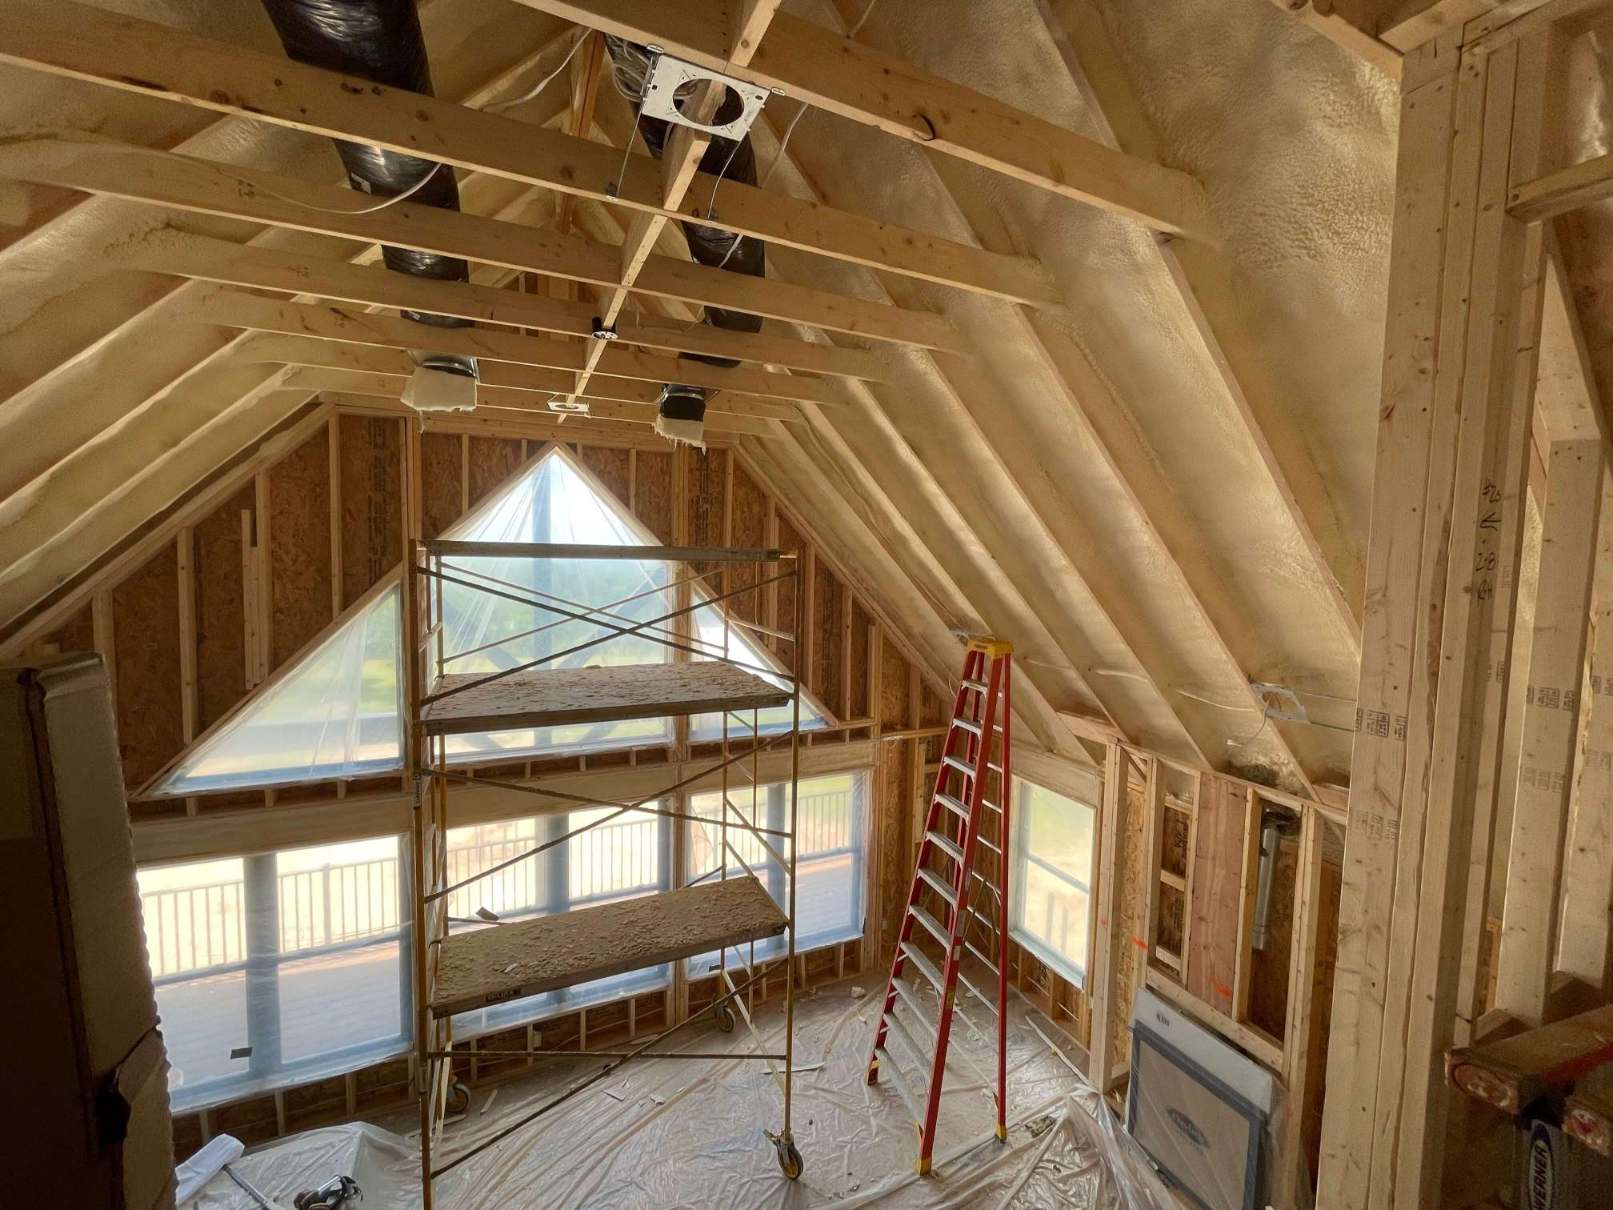 A new construction home, the underside of its roof insulated with closed cell spray foam. Accessibility aids like scaffolding and ladders are visible.